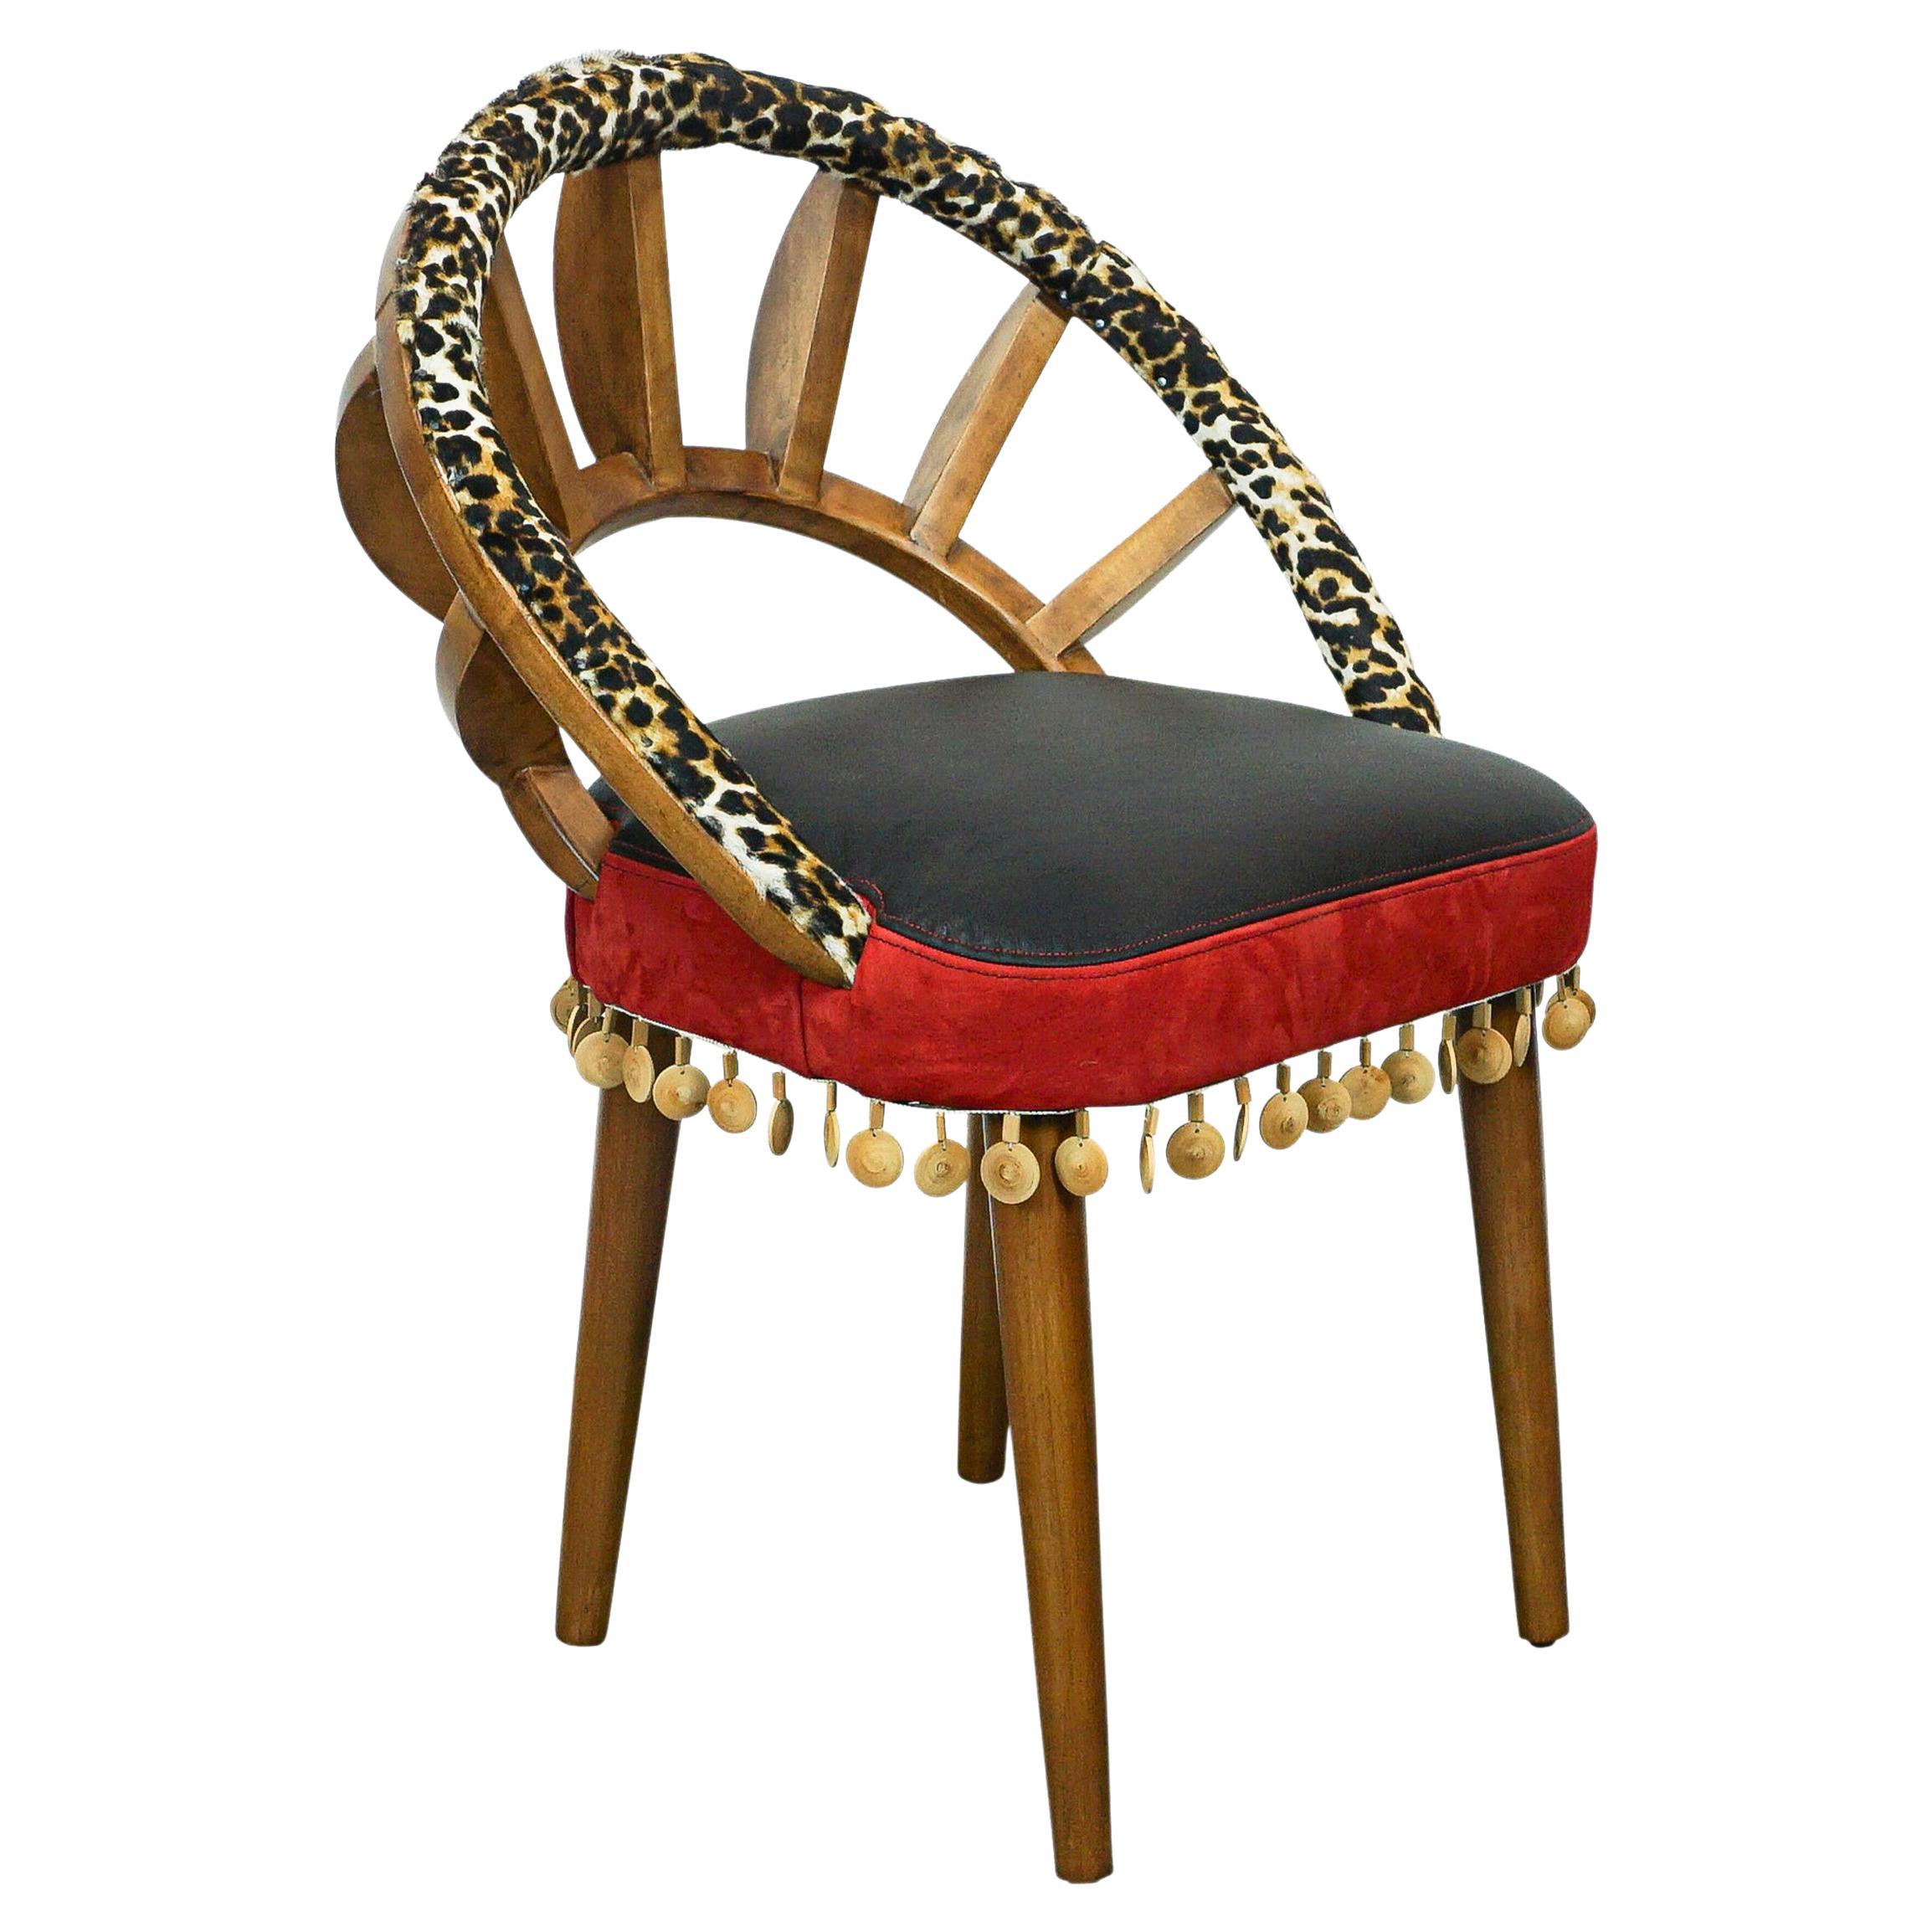 Ribbed Wood Chair with Cheetah Hair on Hide, Red + Black Leather and Wood Bead For Sale